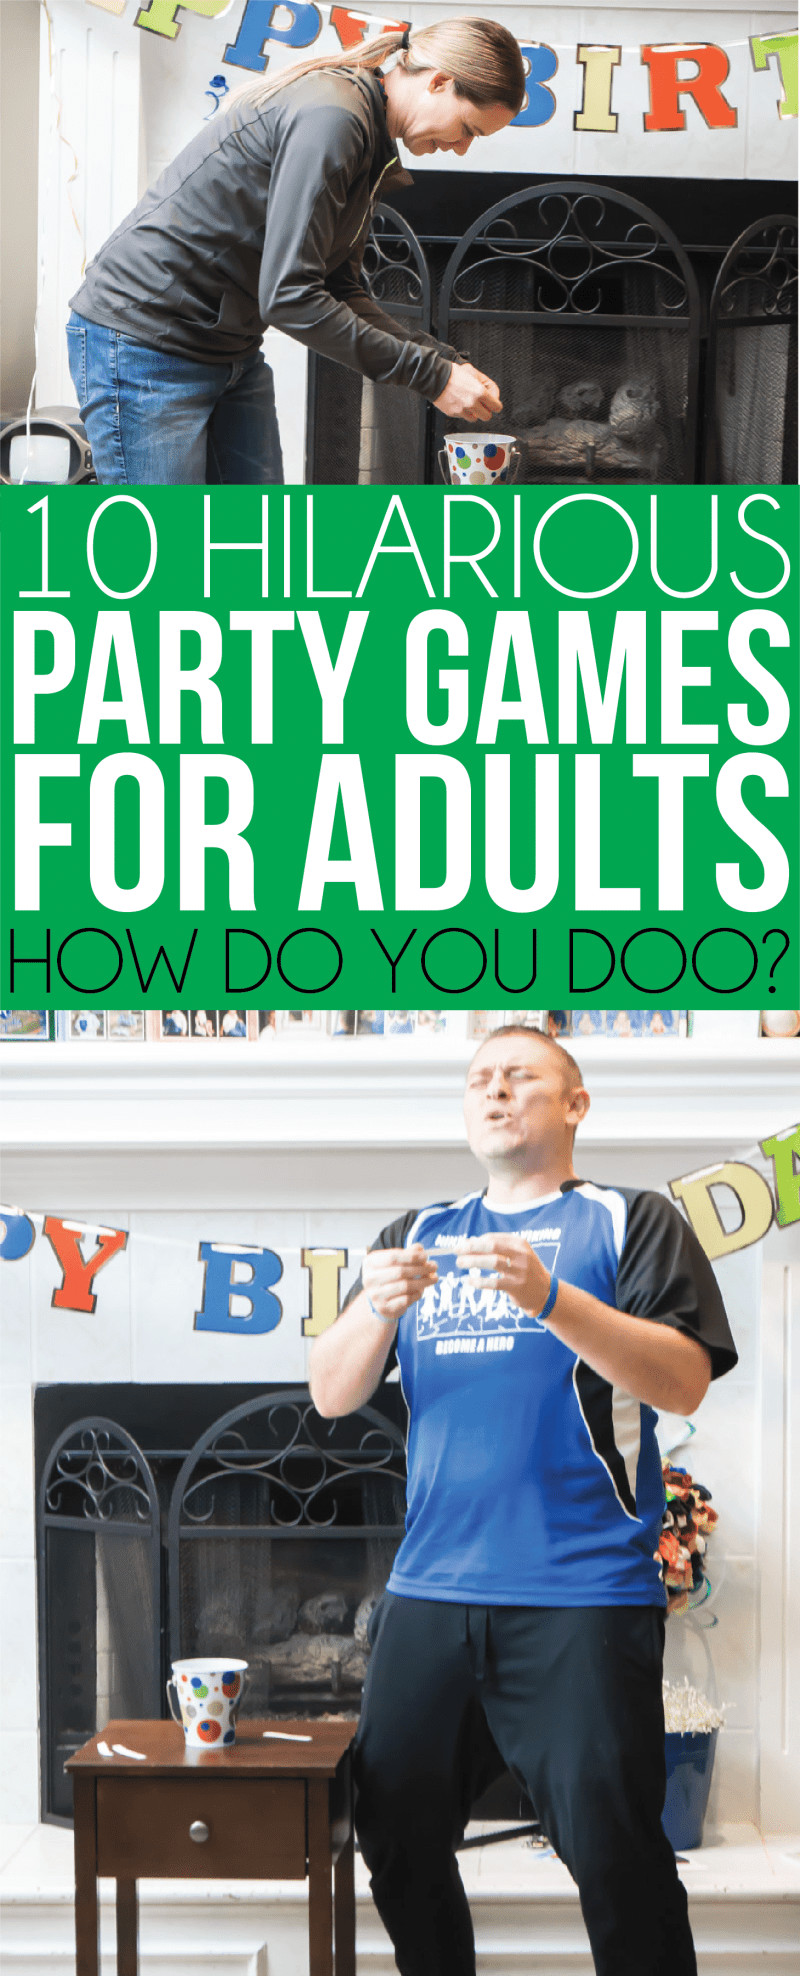 Fun Ideas For Adults
 10 Hilarious Party Games for Adults that You ve Probably